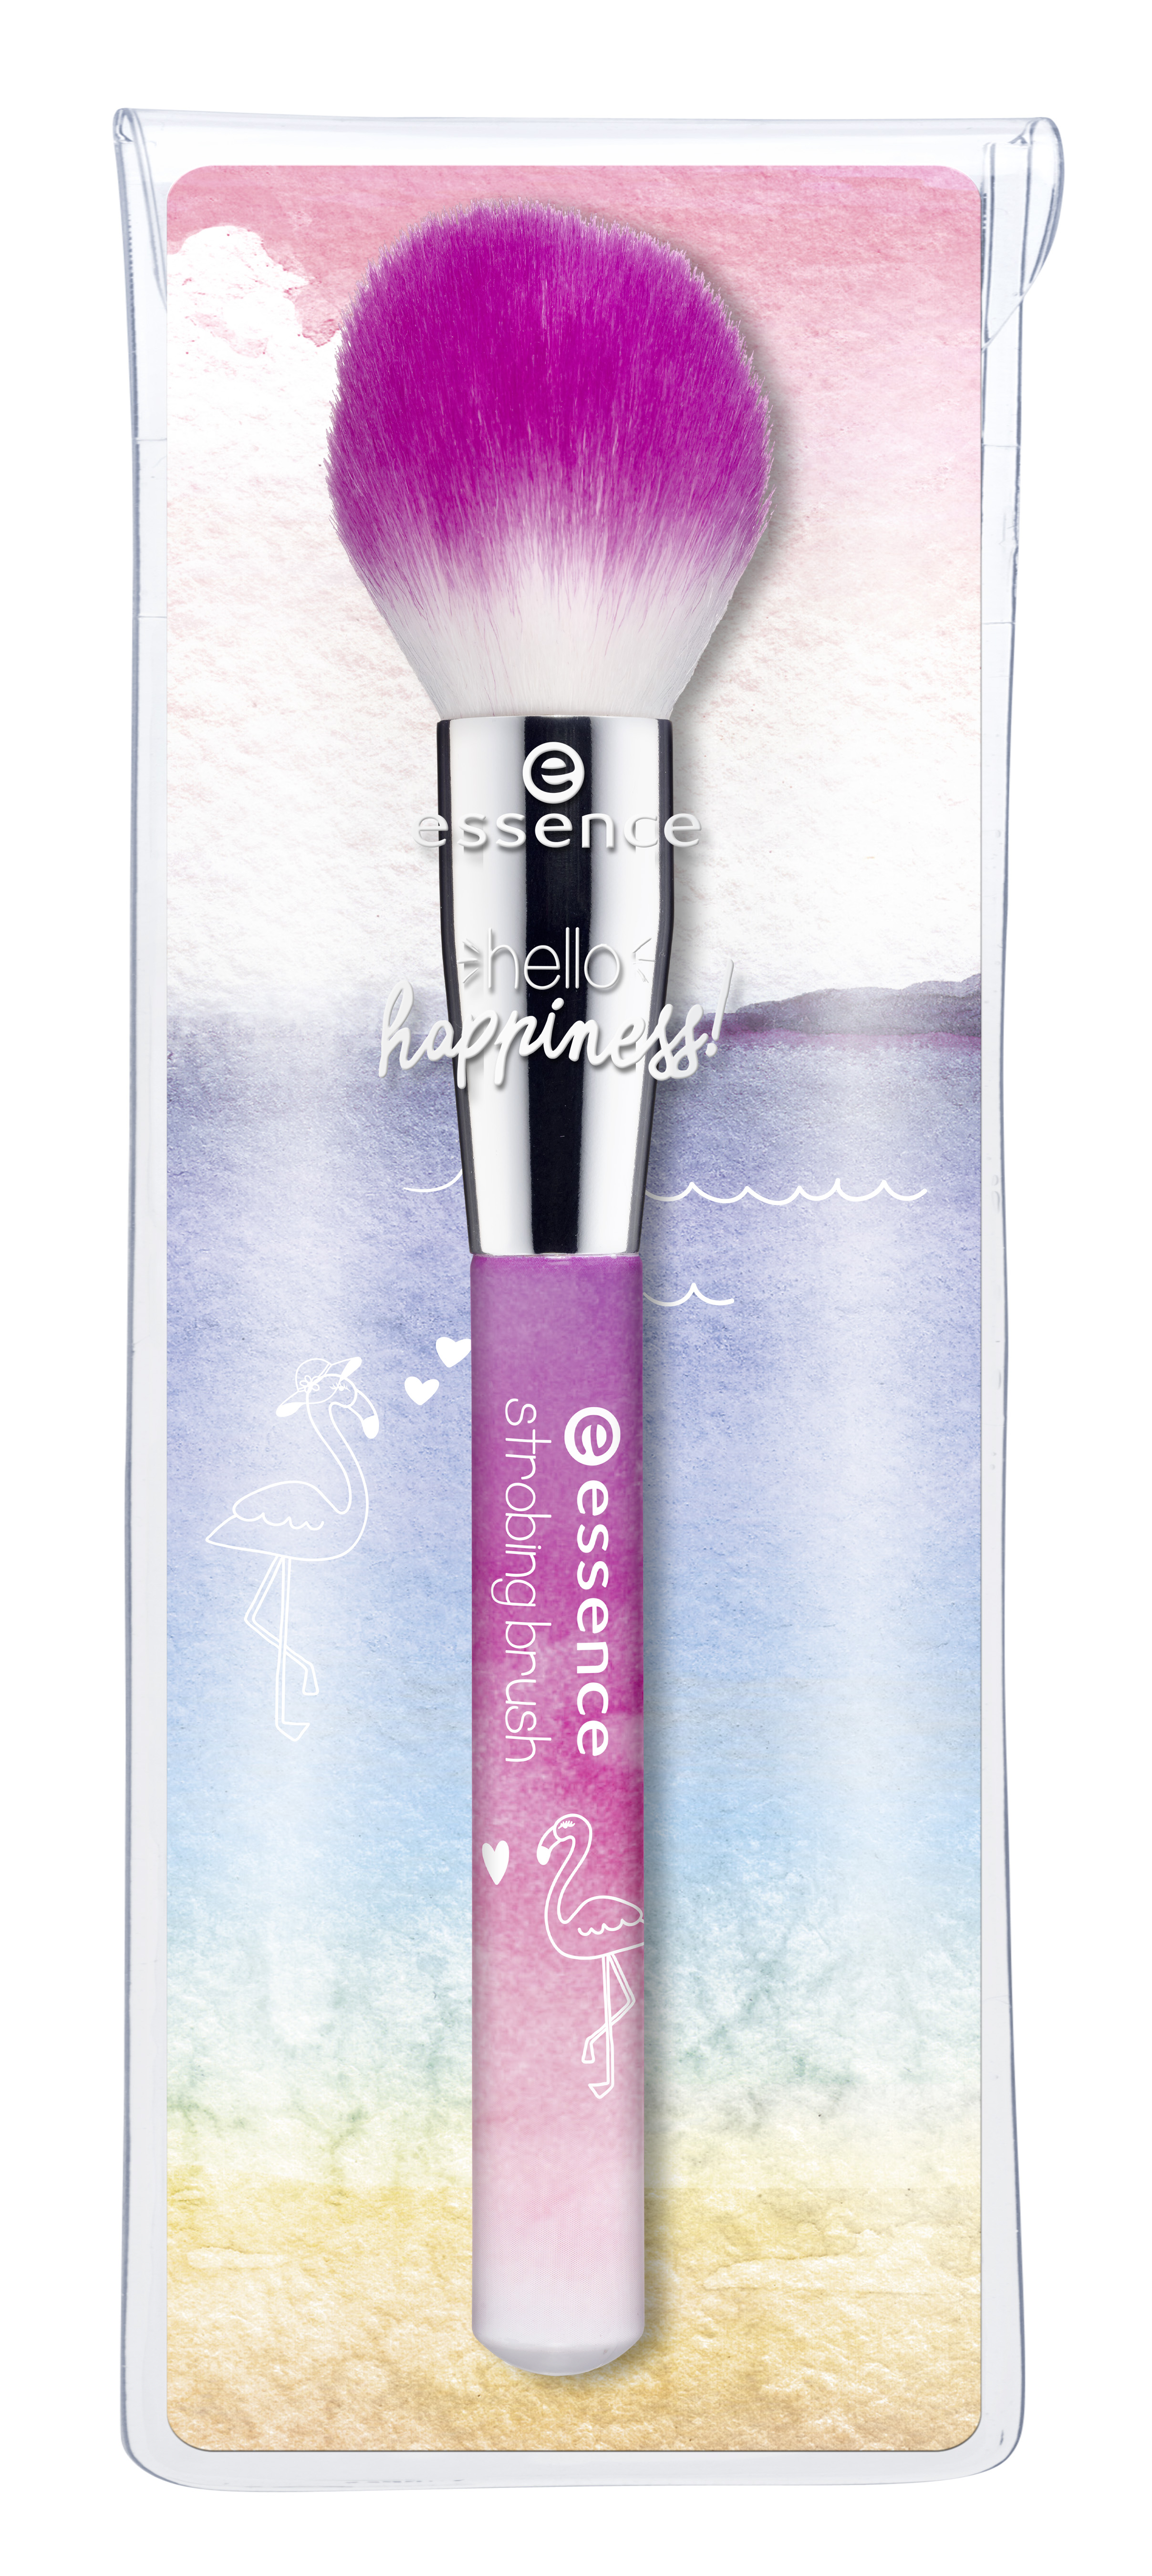 essence hello happiness! strobing brush pouch